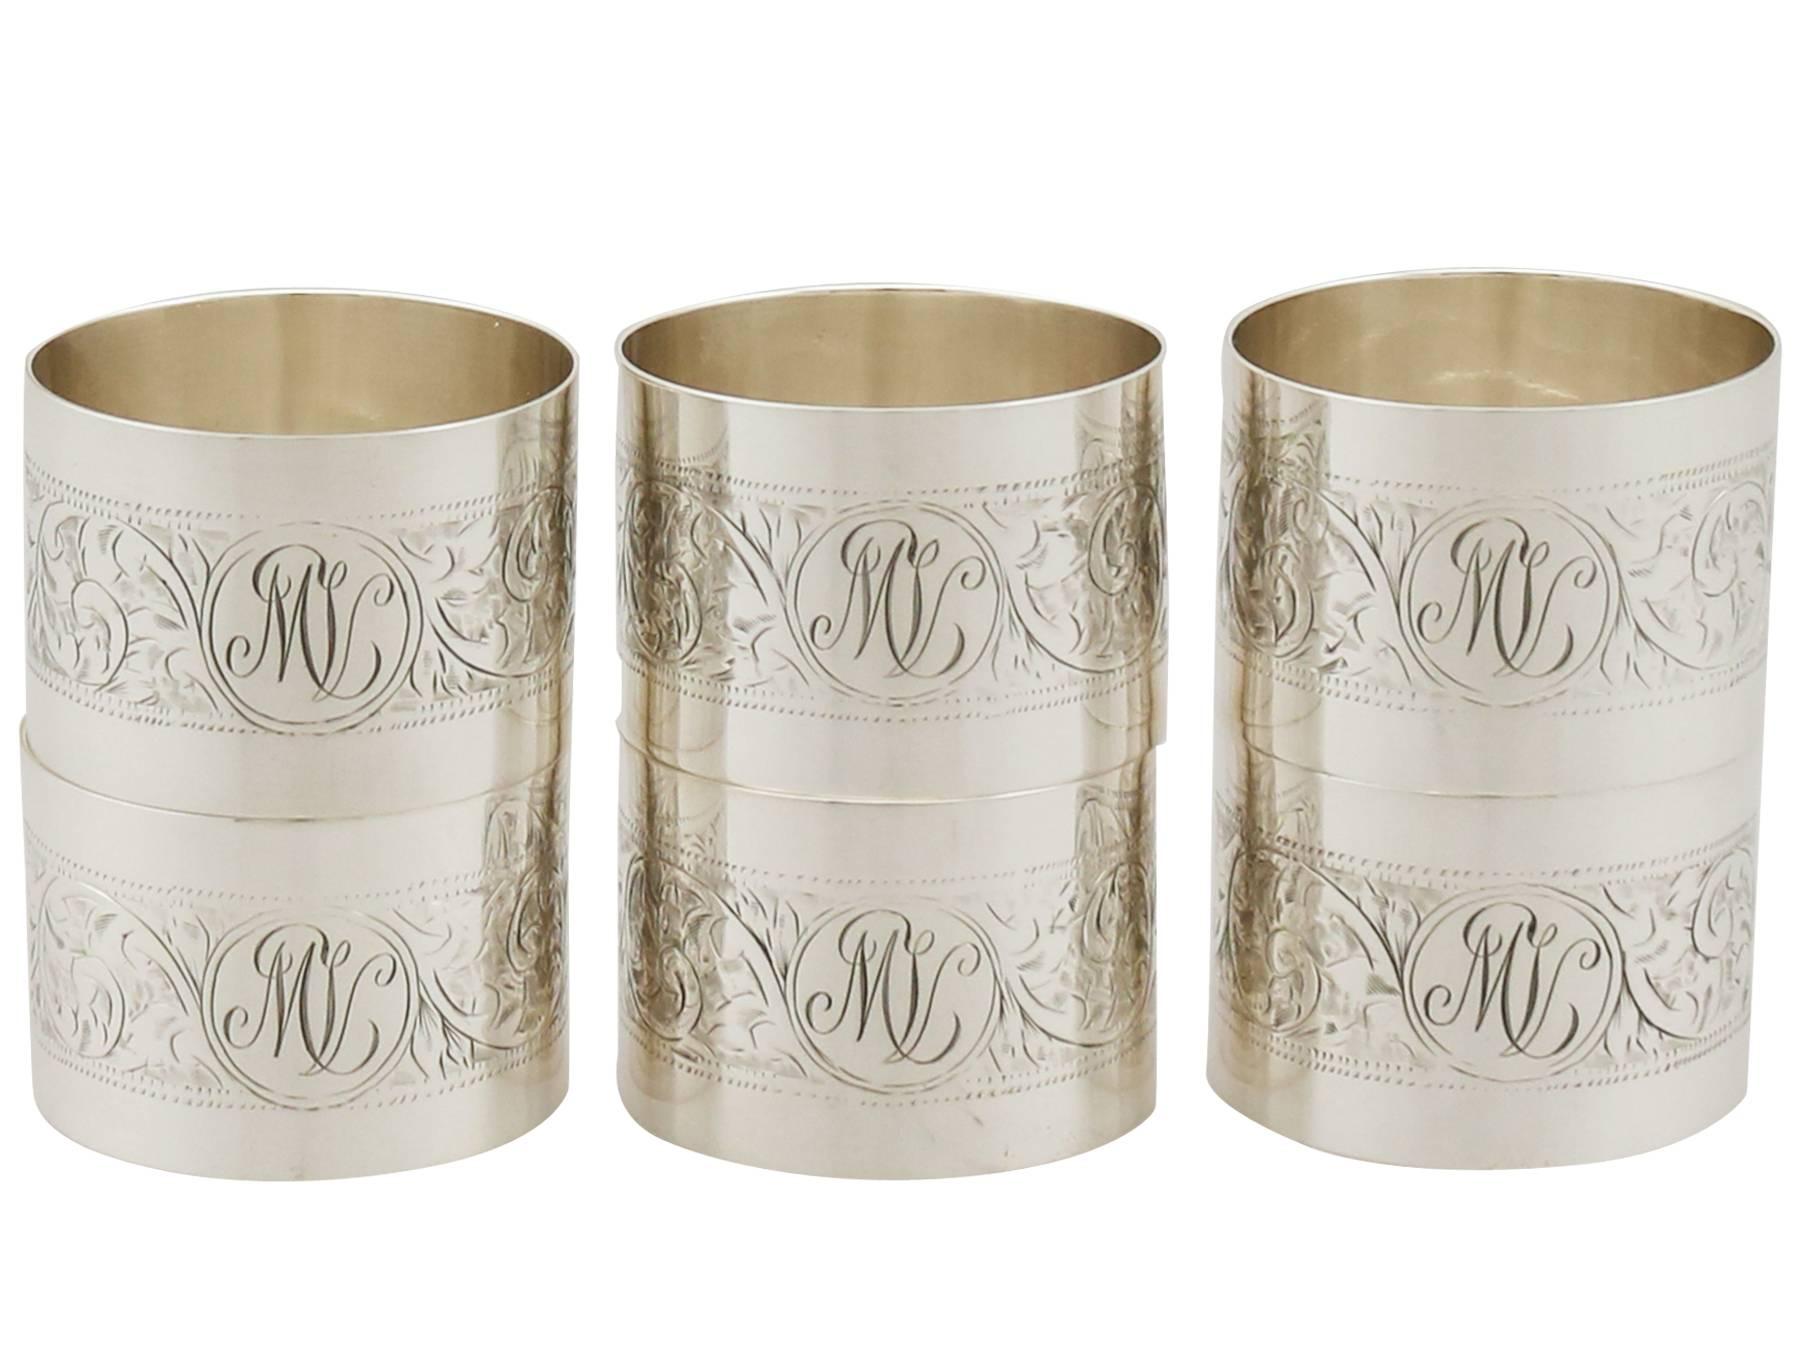 An exceptional, fine and impressive set of six antique George V English sterling silver napkin rings - boxed; an addition to our dining silverware collection.

This exceptional set of antique George V silver napkin rings consists of six napkin